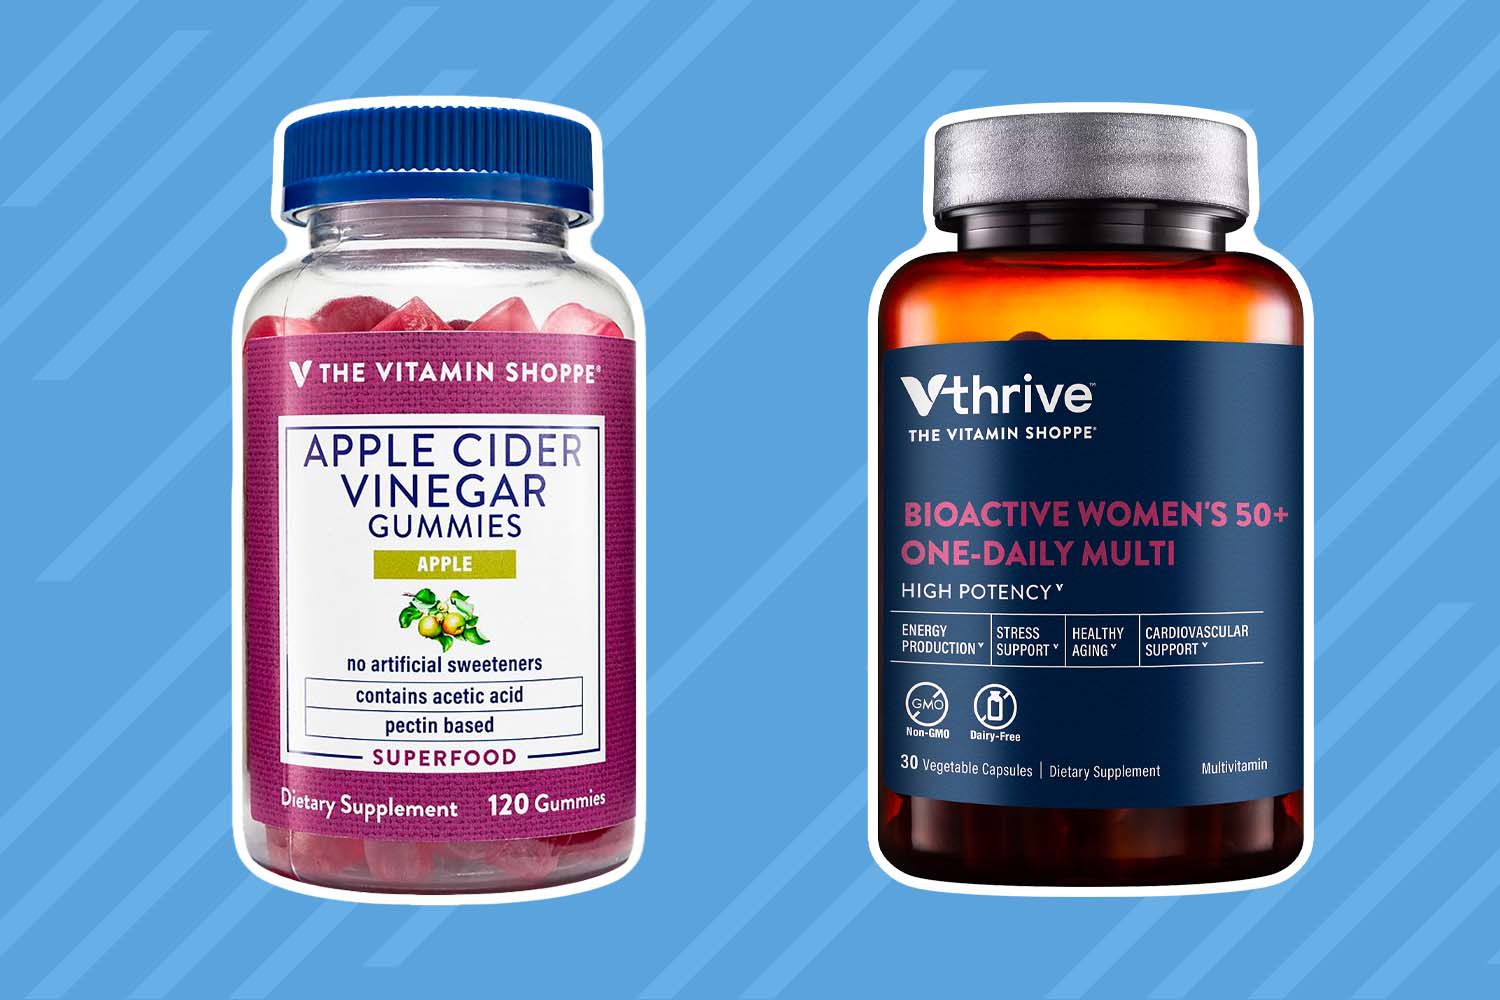 Vitamin bottles from the best places to buy vitamins on blue striped background